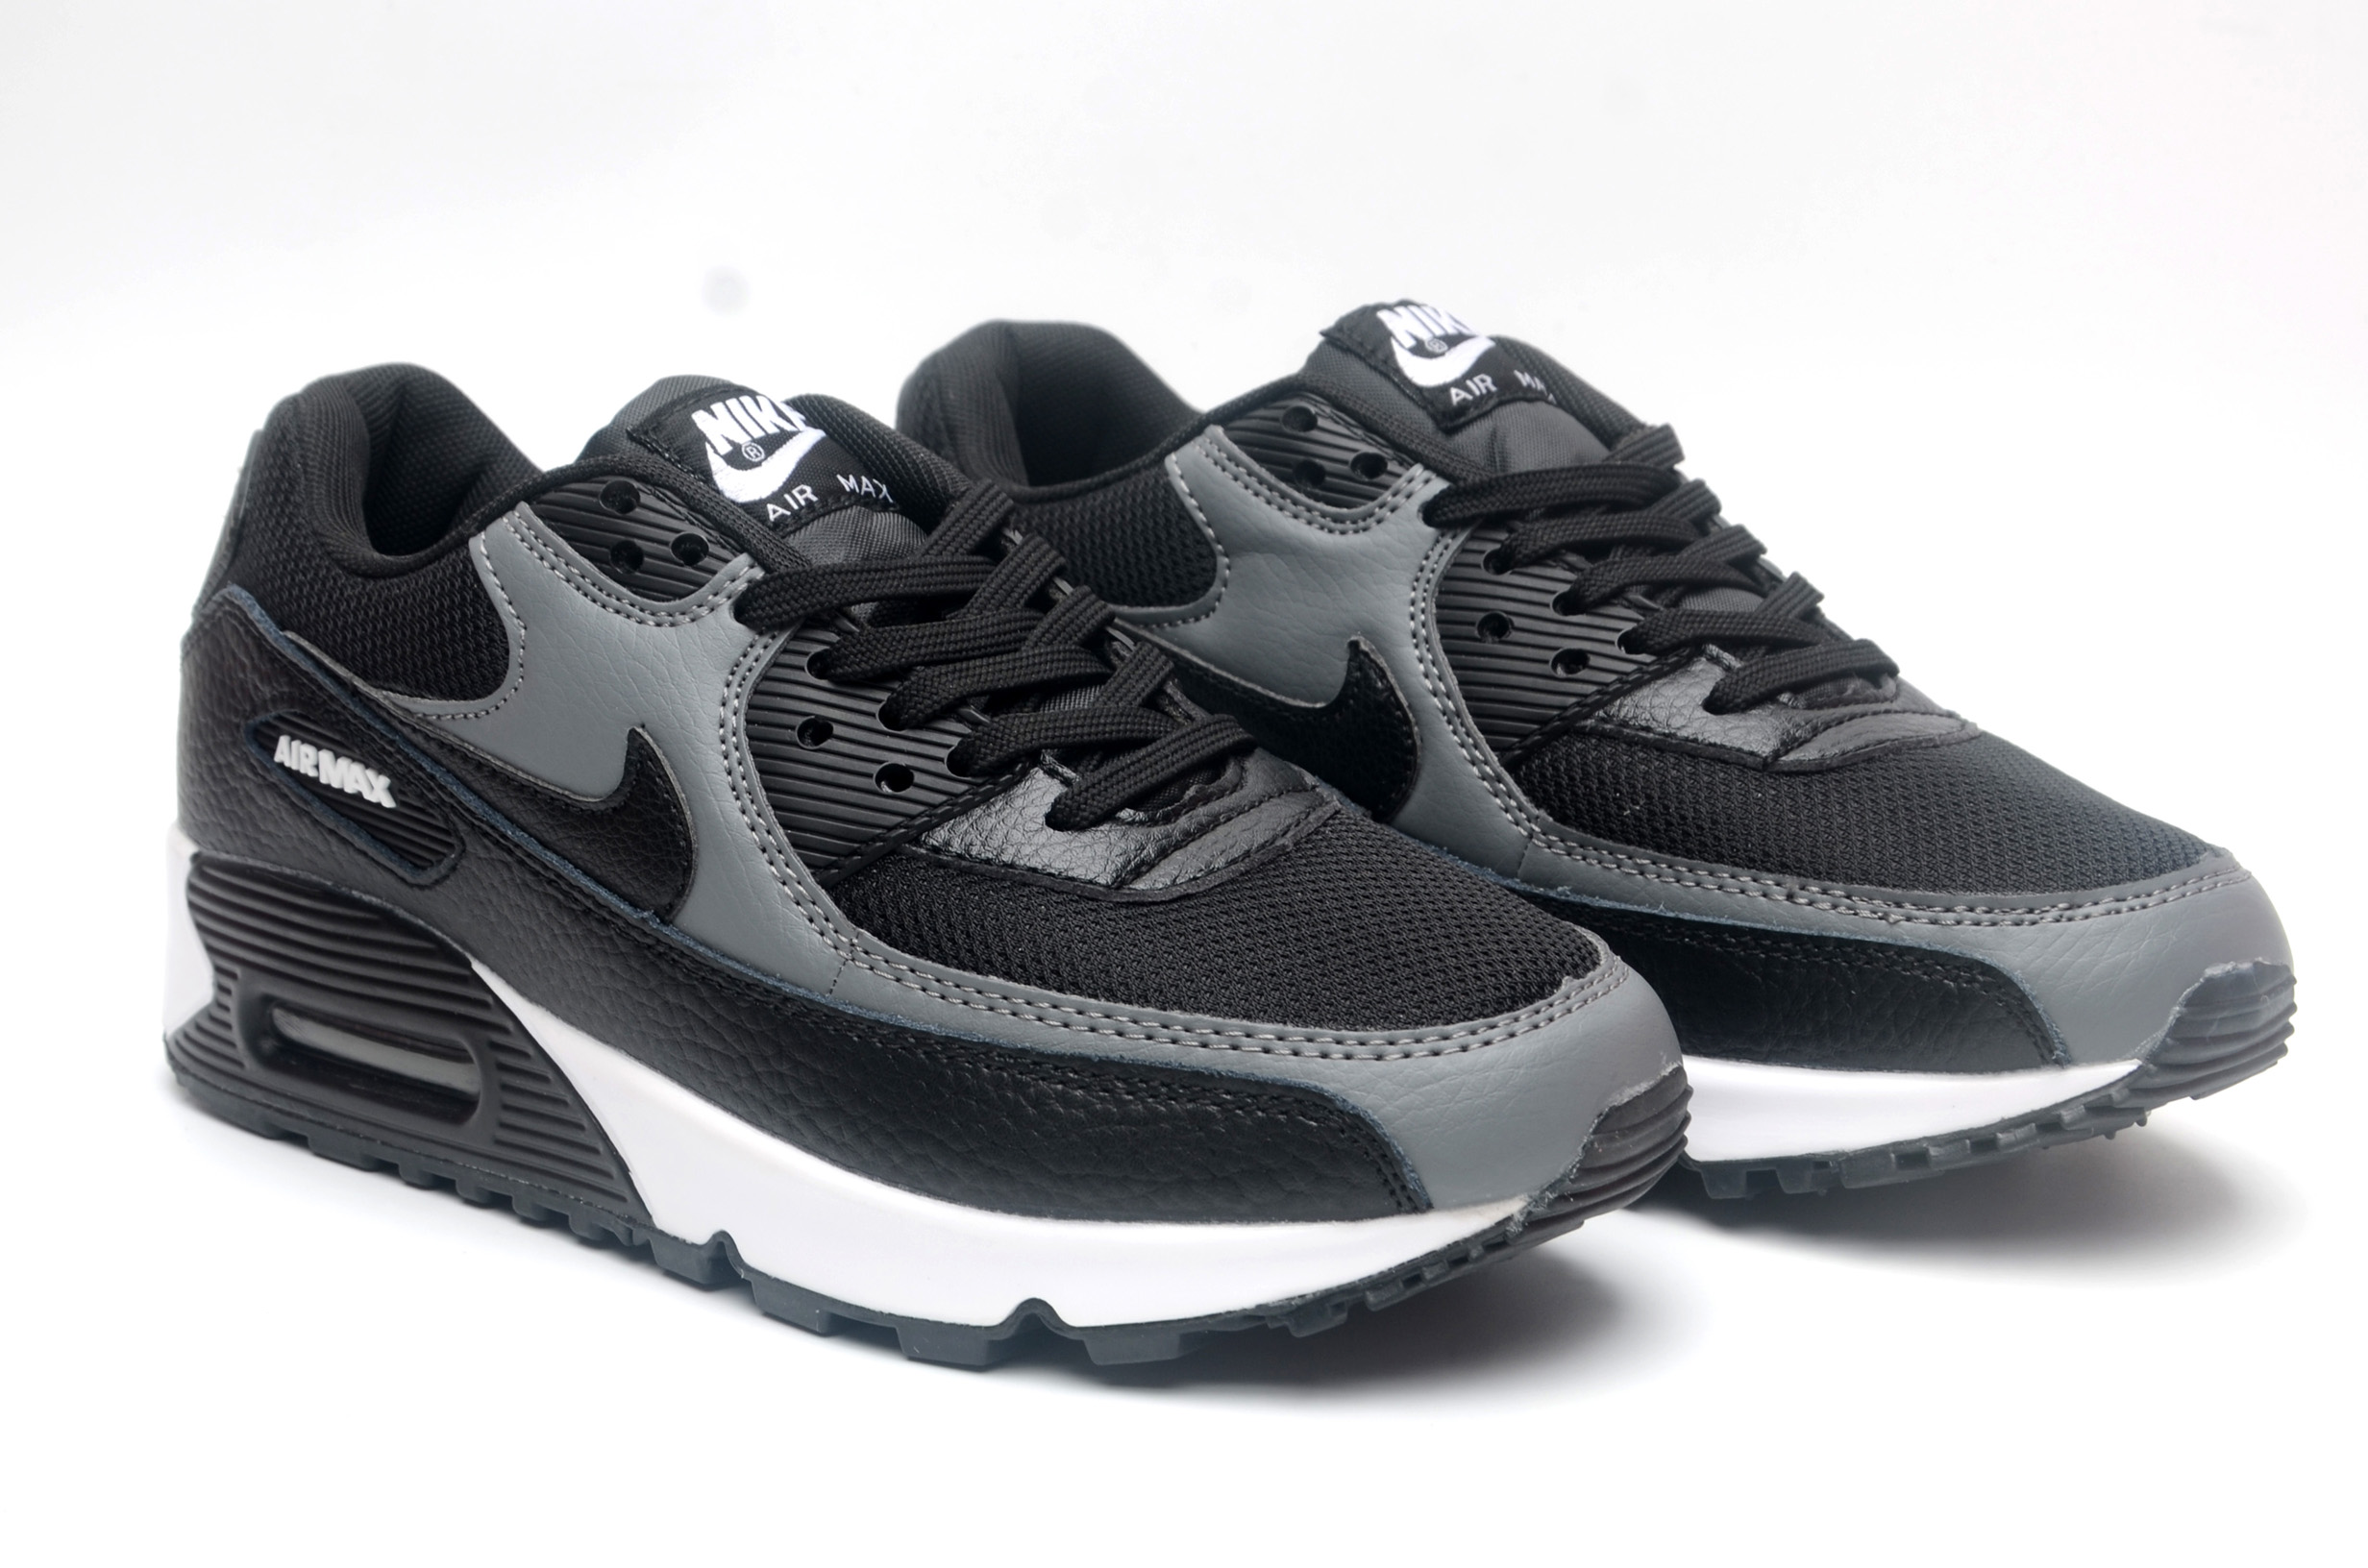 Men's Running weapon Air Max 90 Shoes 042